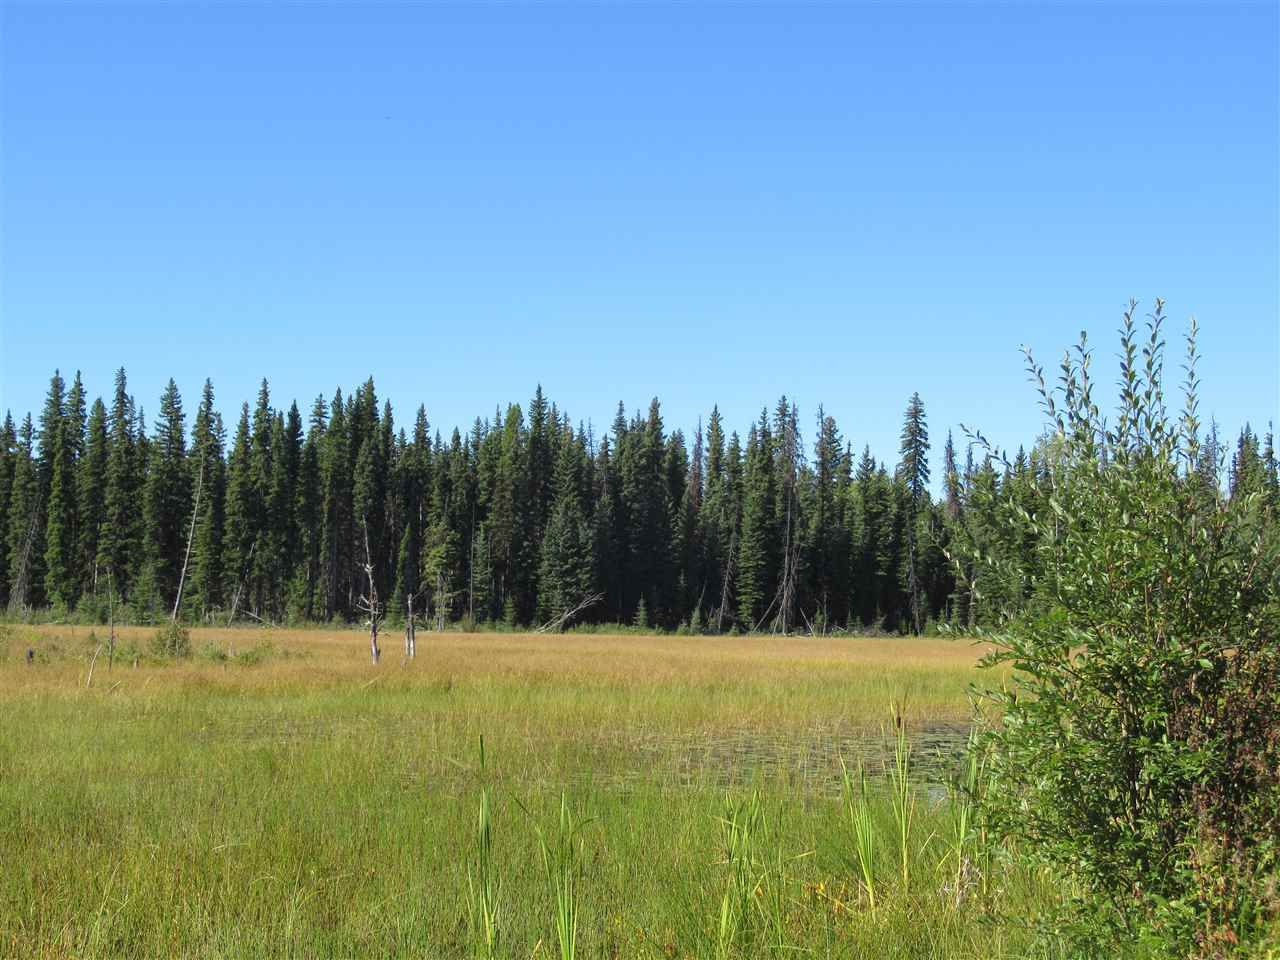 Main Photo: DL 6426 TONKA Road: 150 Mile House Land for sale (Williams Lake (Zone 27))  : MLS®# R2497364